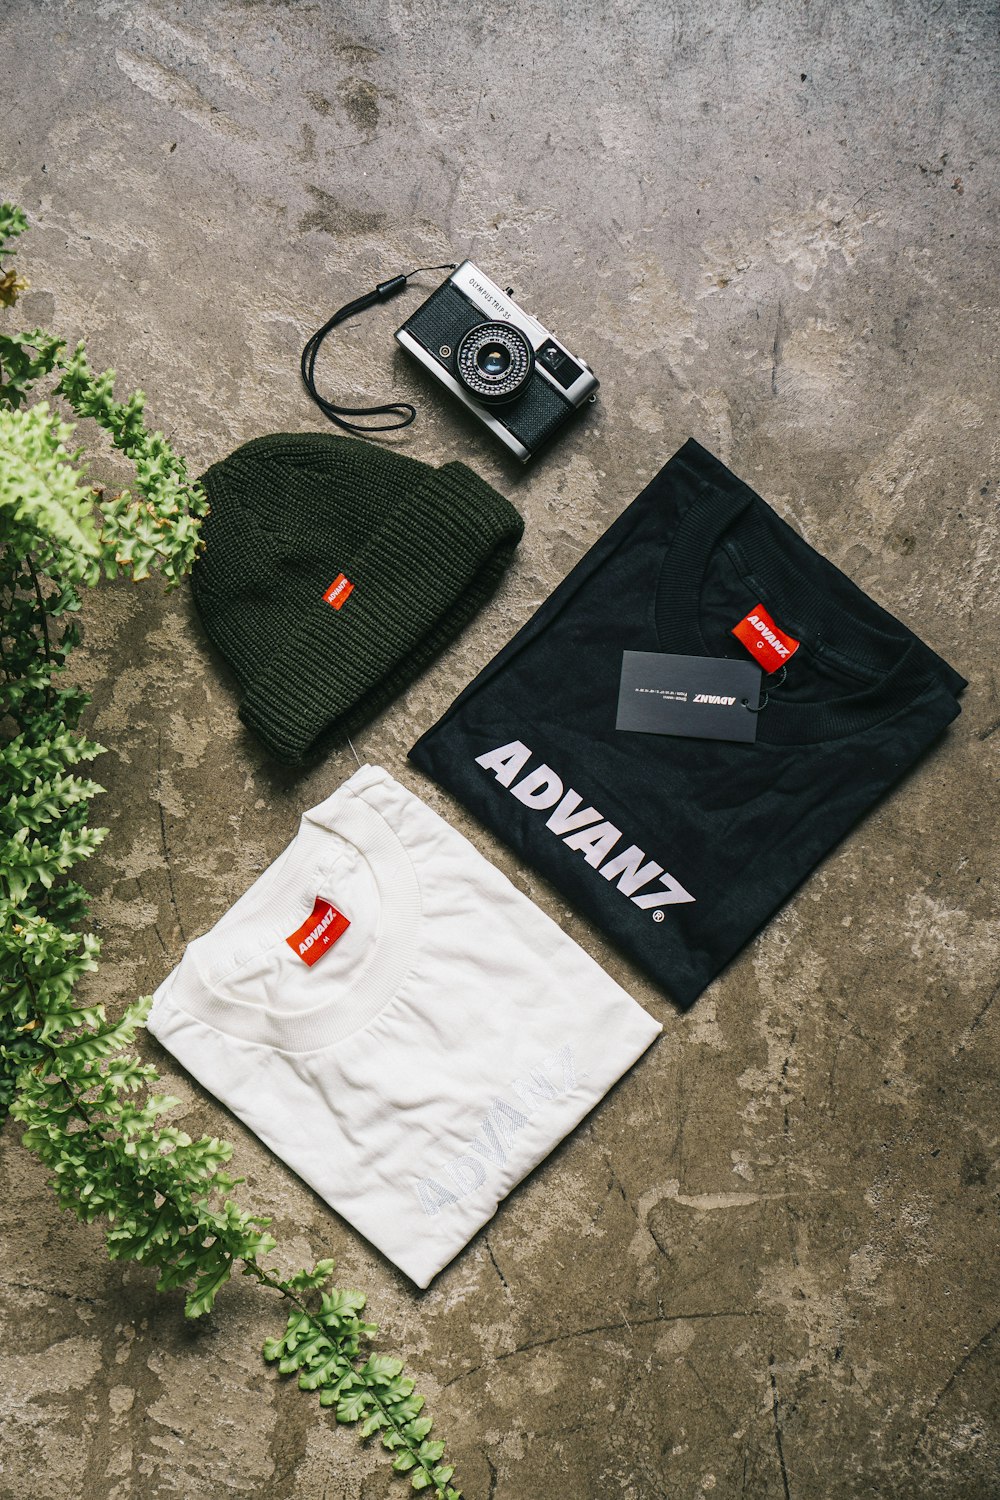 two black and white Advanz shirts beside knit cap and camera